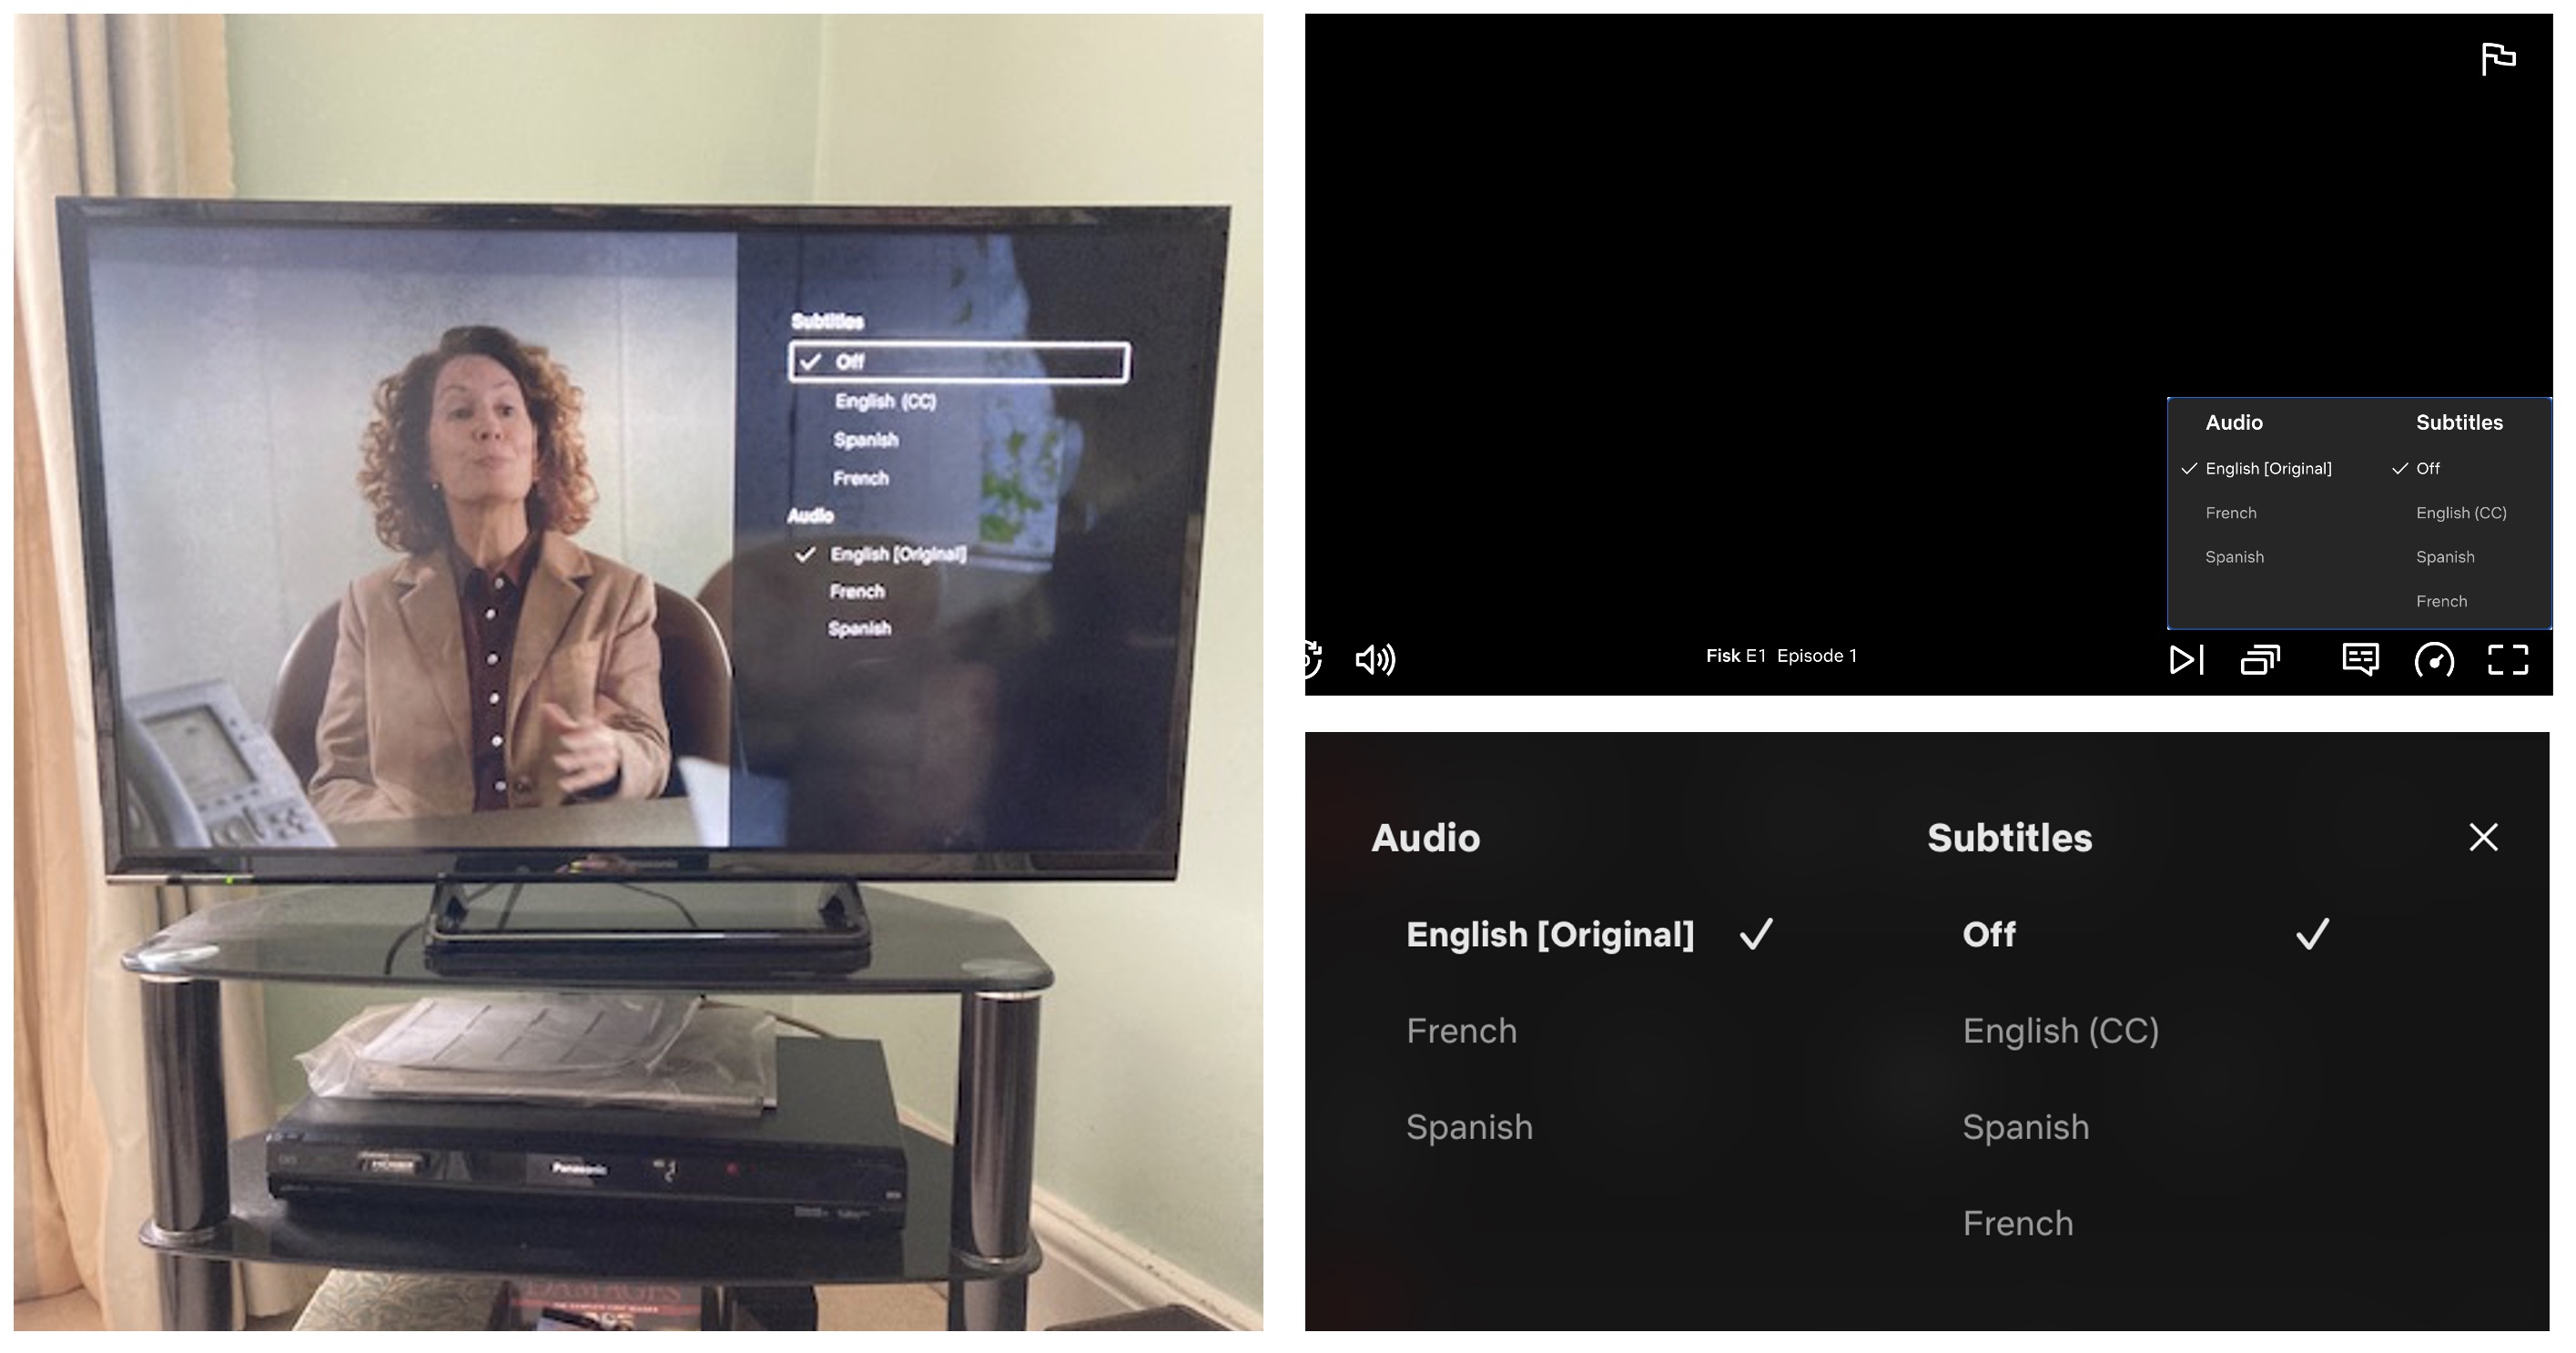 Three screenshots showing the same design for the Netflix  Audio & Subtitles menu on TV, web and iOS